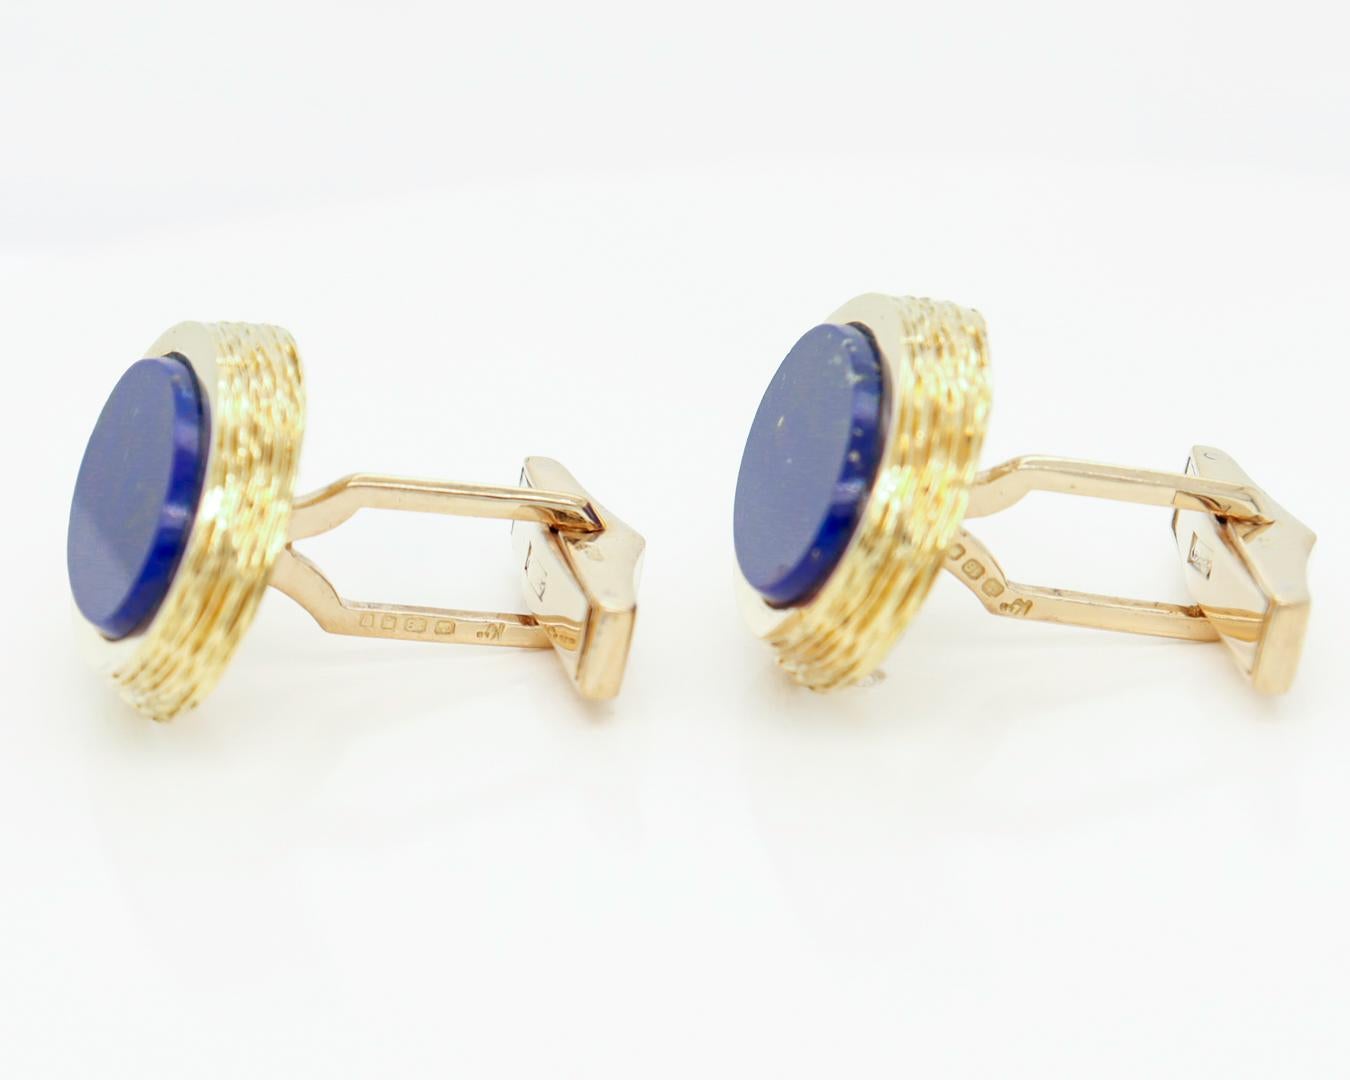 Cabochon Pair of English Mid-Century Modern 18k Gold & Lapis Cufflinks by Kutchinsky For Sale